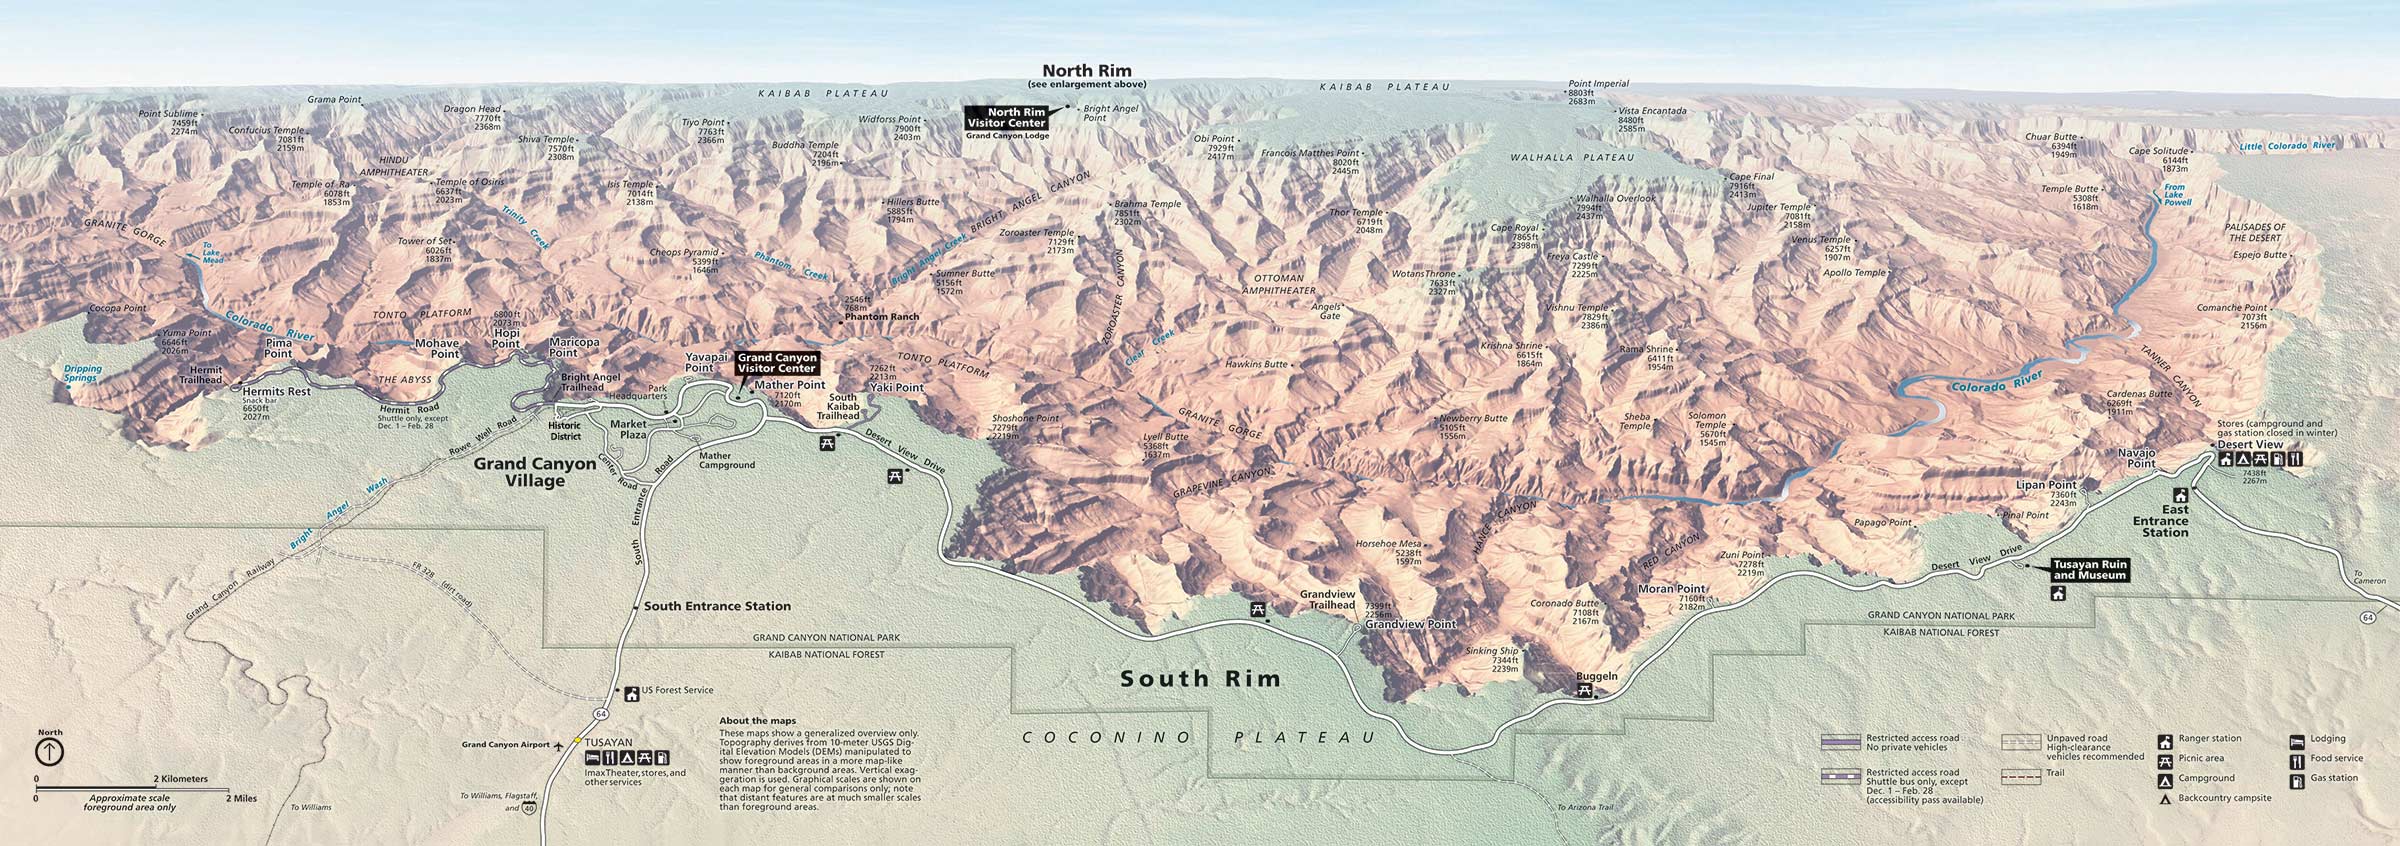 Grand Canyon Panorama Map: South Rim In Foreground, Canyon In Shaded Relief And North Rim At The Top. - Grand Canyon Panorama Map: South Rim in foreground, canyon in shaded relief and North Rim at the top.